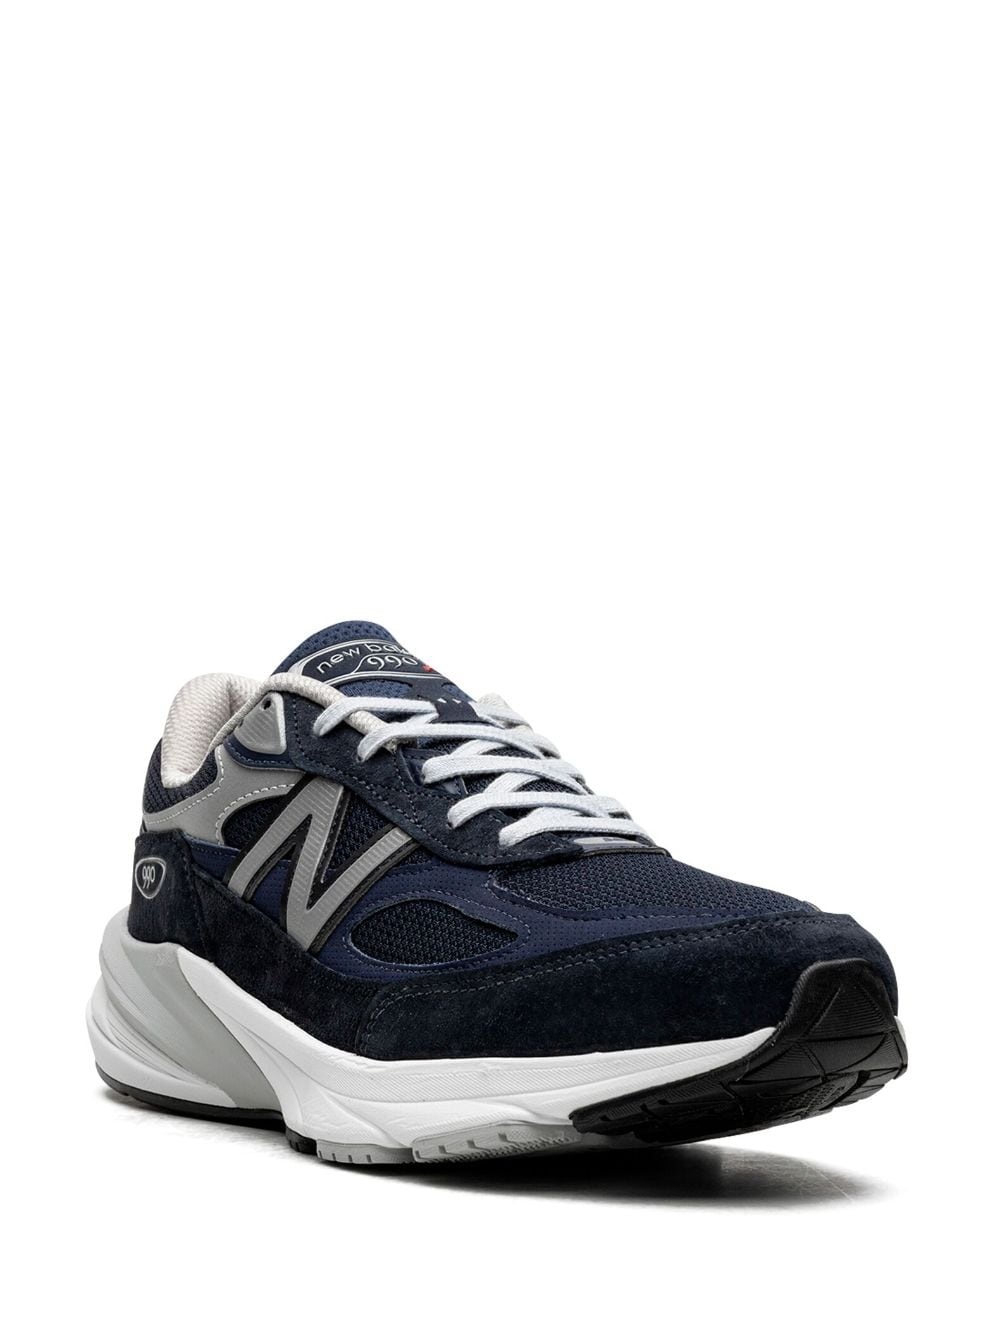 990v6 "Navy" leather sneakers - 2